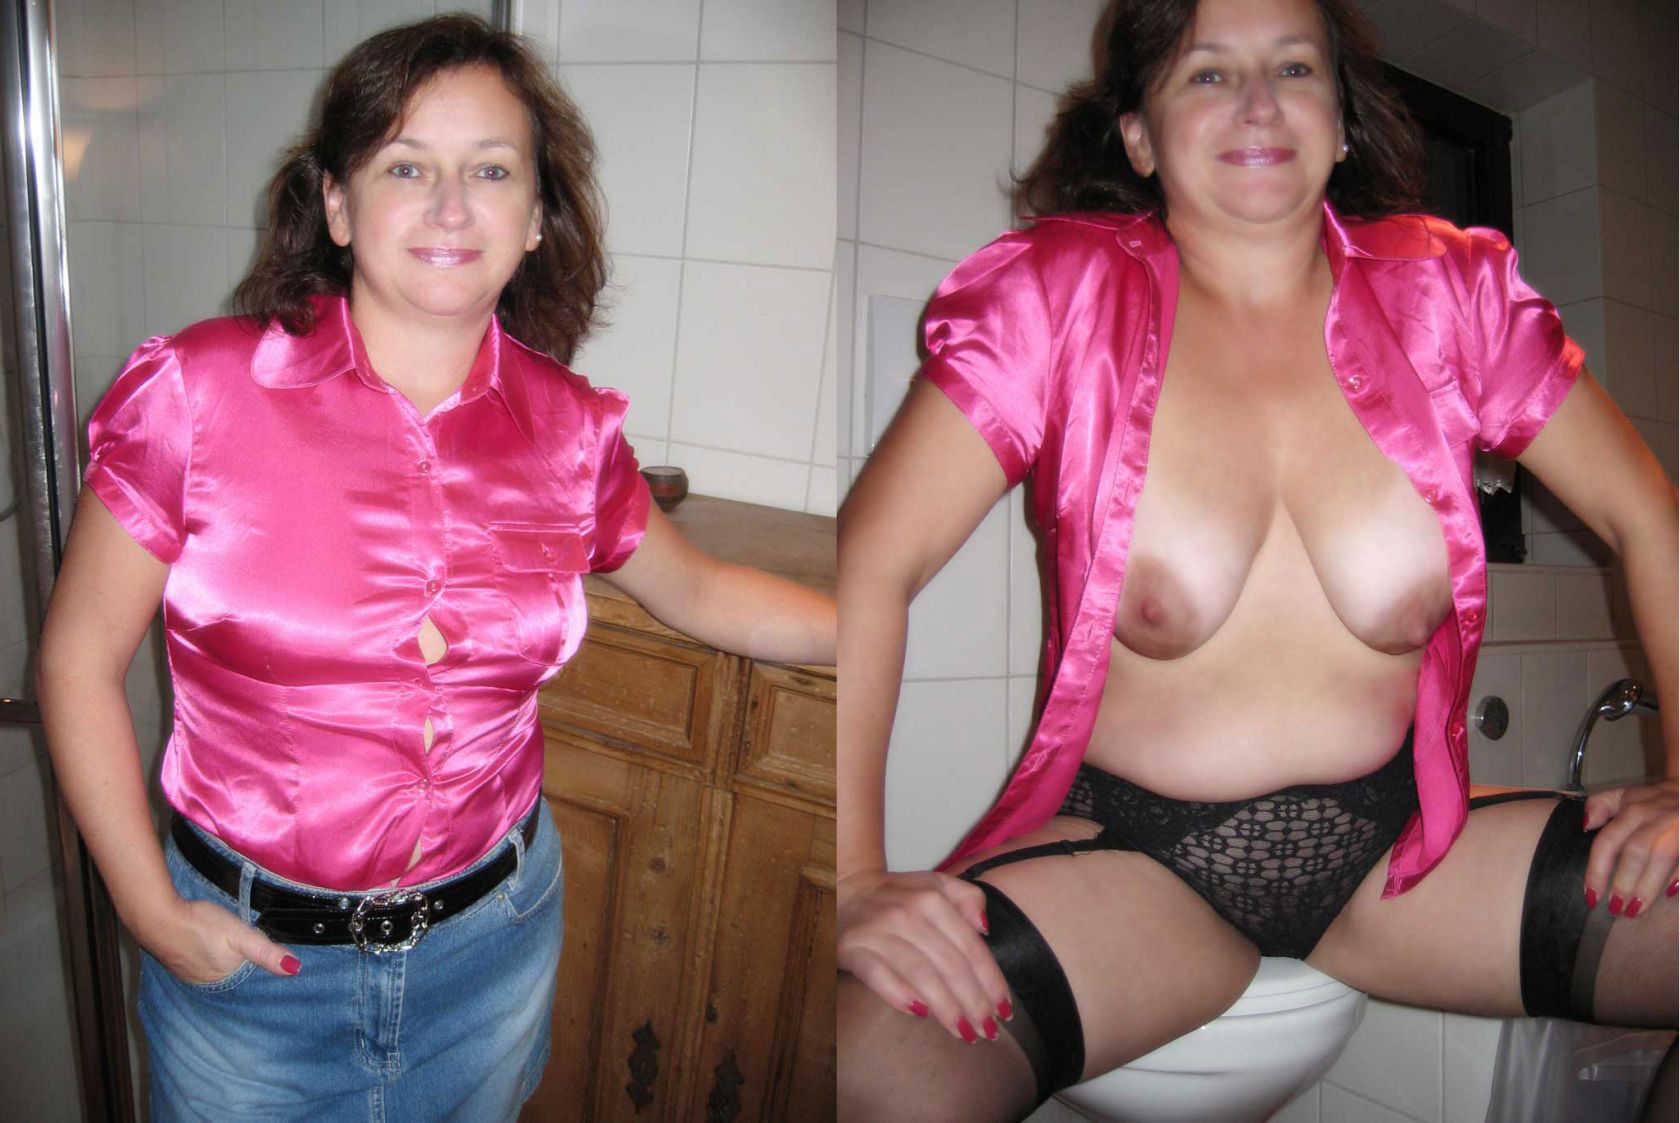 sandra_clothed_unclothed02